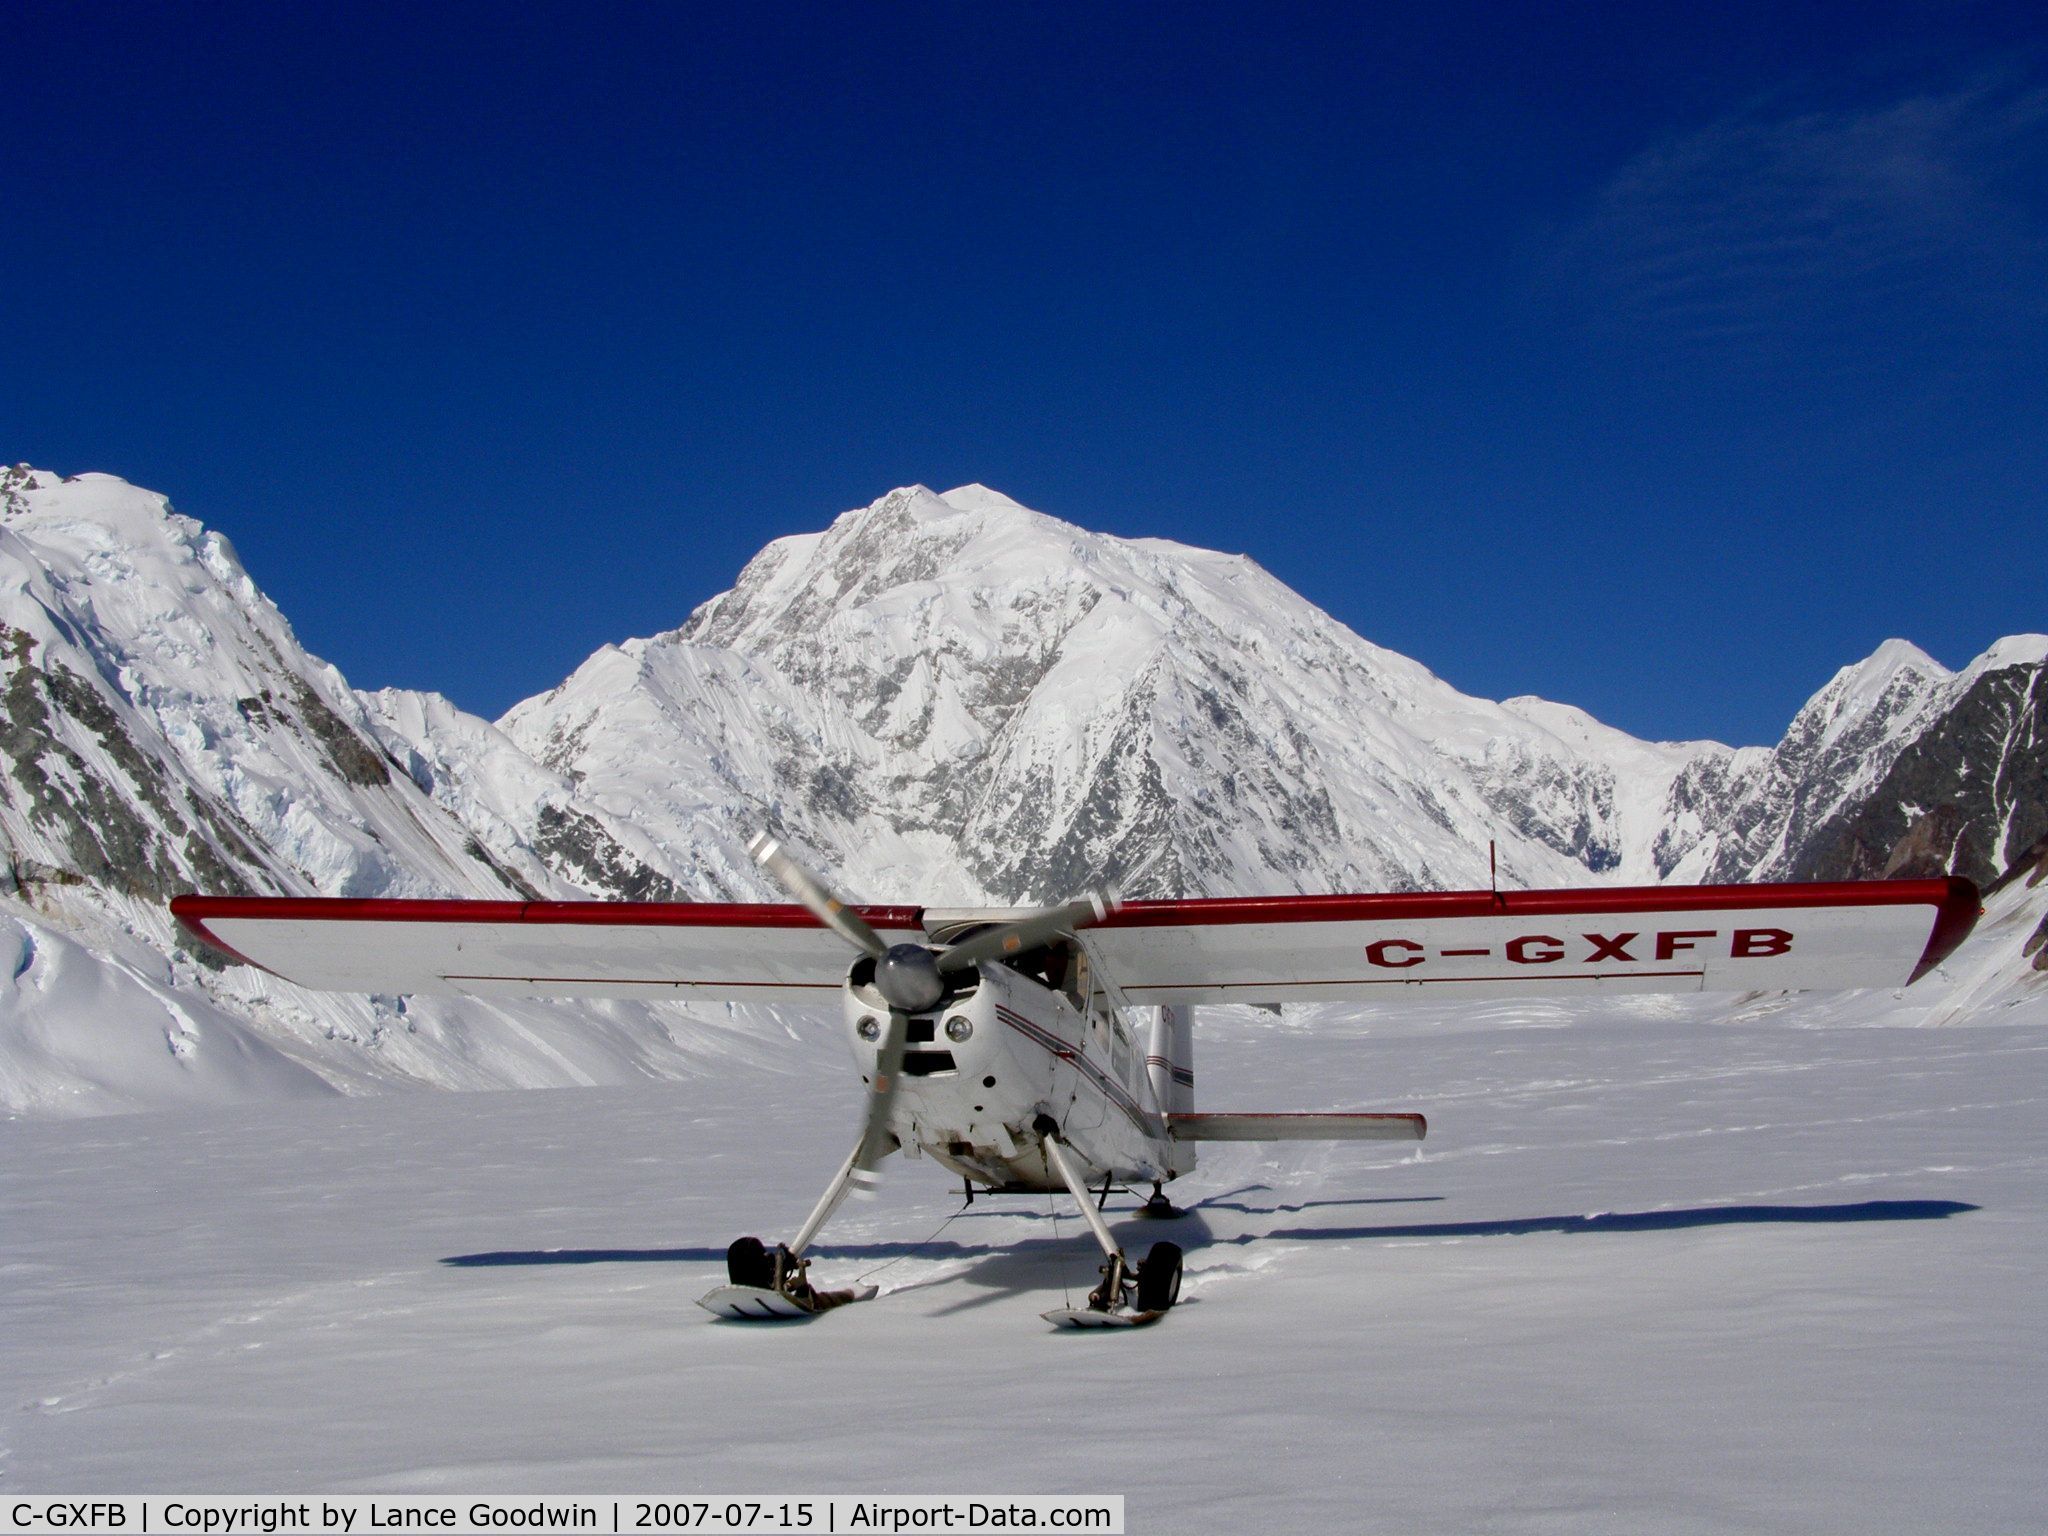 C-GXFB, 1966 Helio H-295-1200 Super Courier C/N 1223, Helio Courier C-GXFB in front of Mt.Logan Canadas highest Mt.
Helios like the H295 were regularly landed on the plateau at 17,500' during the 1970's and 80s.